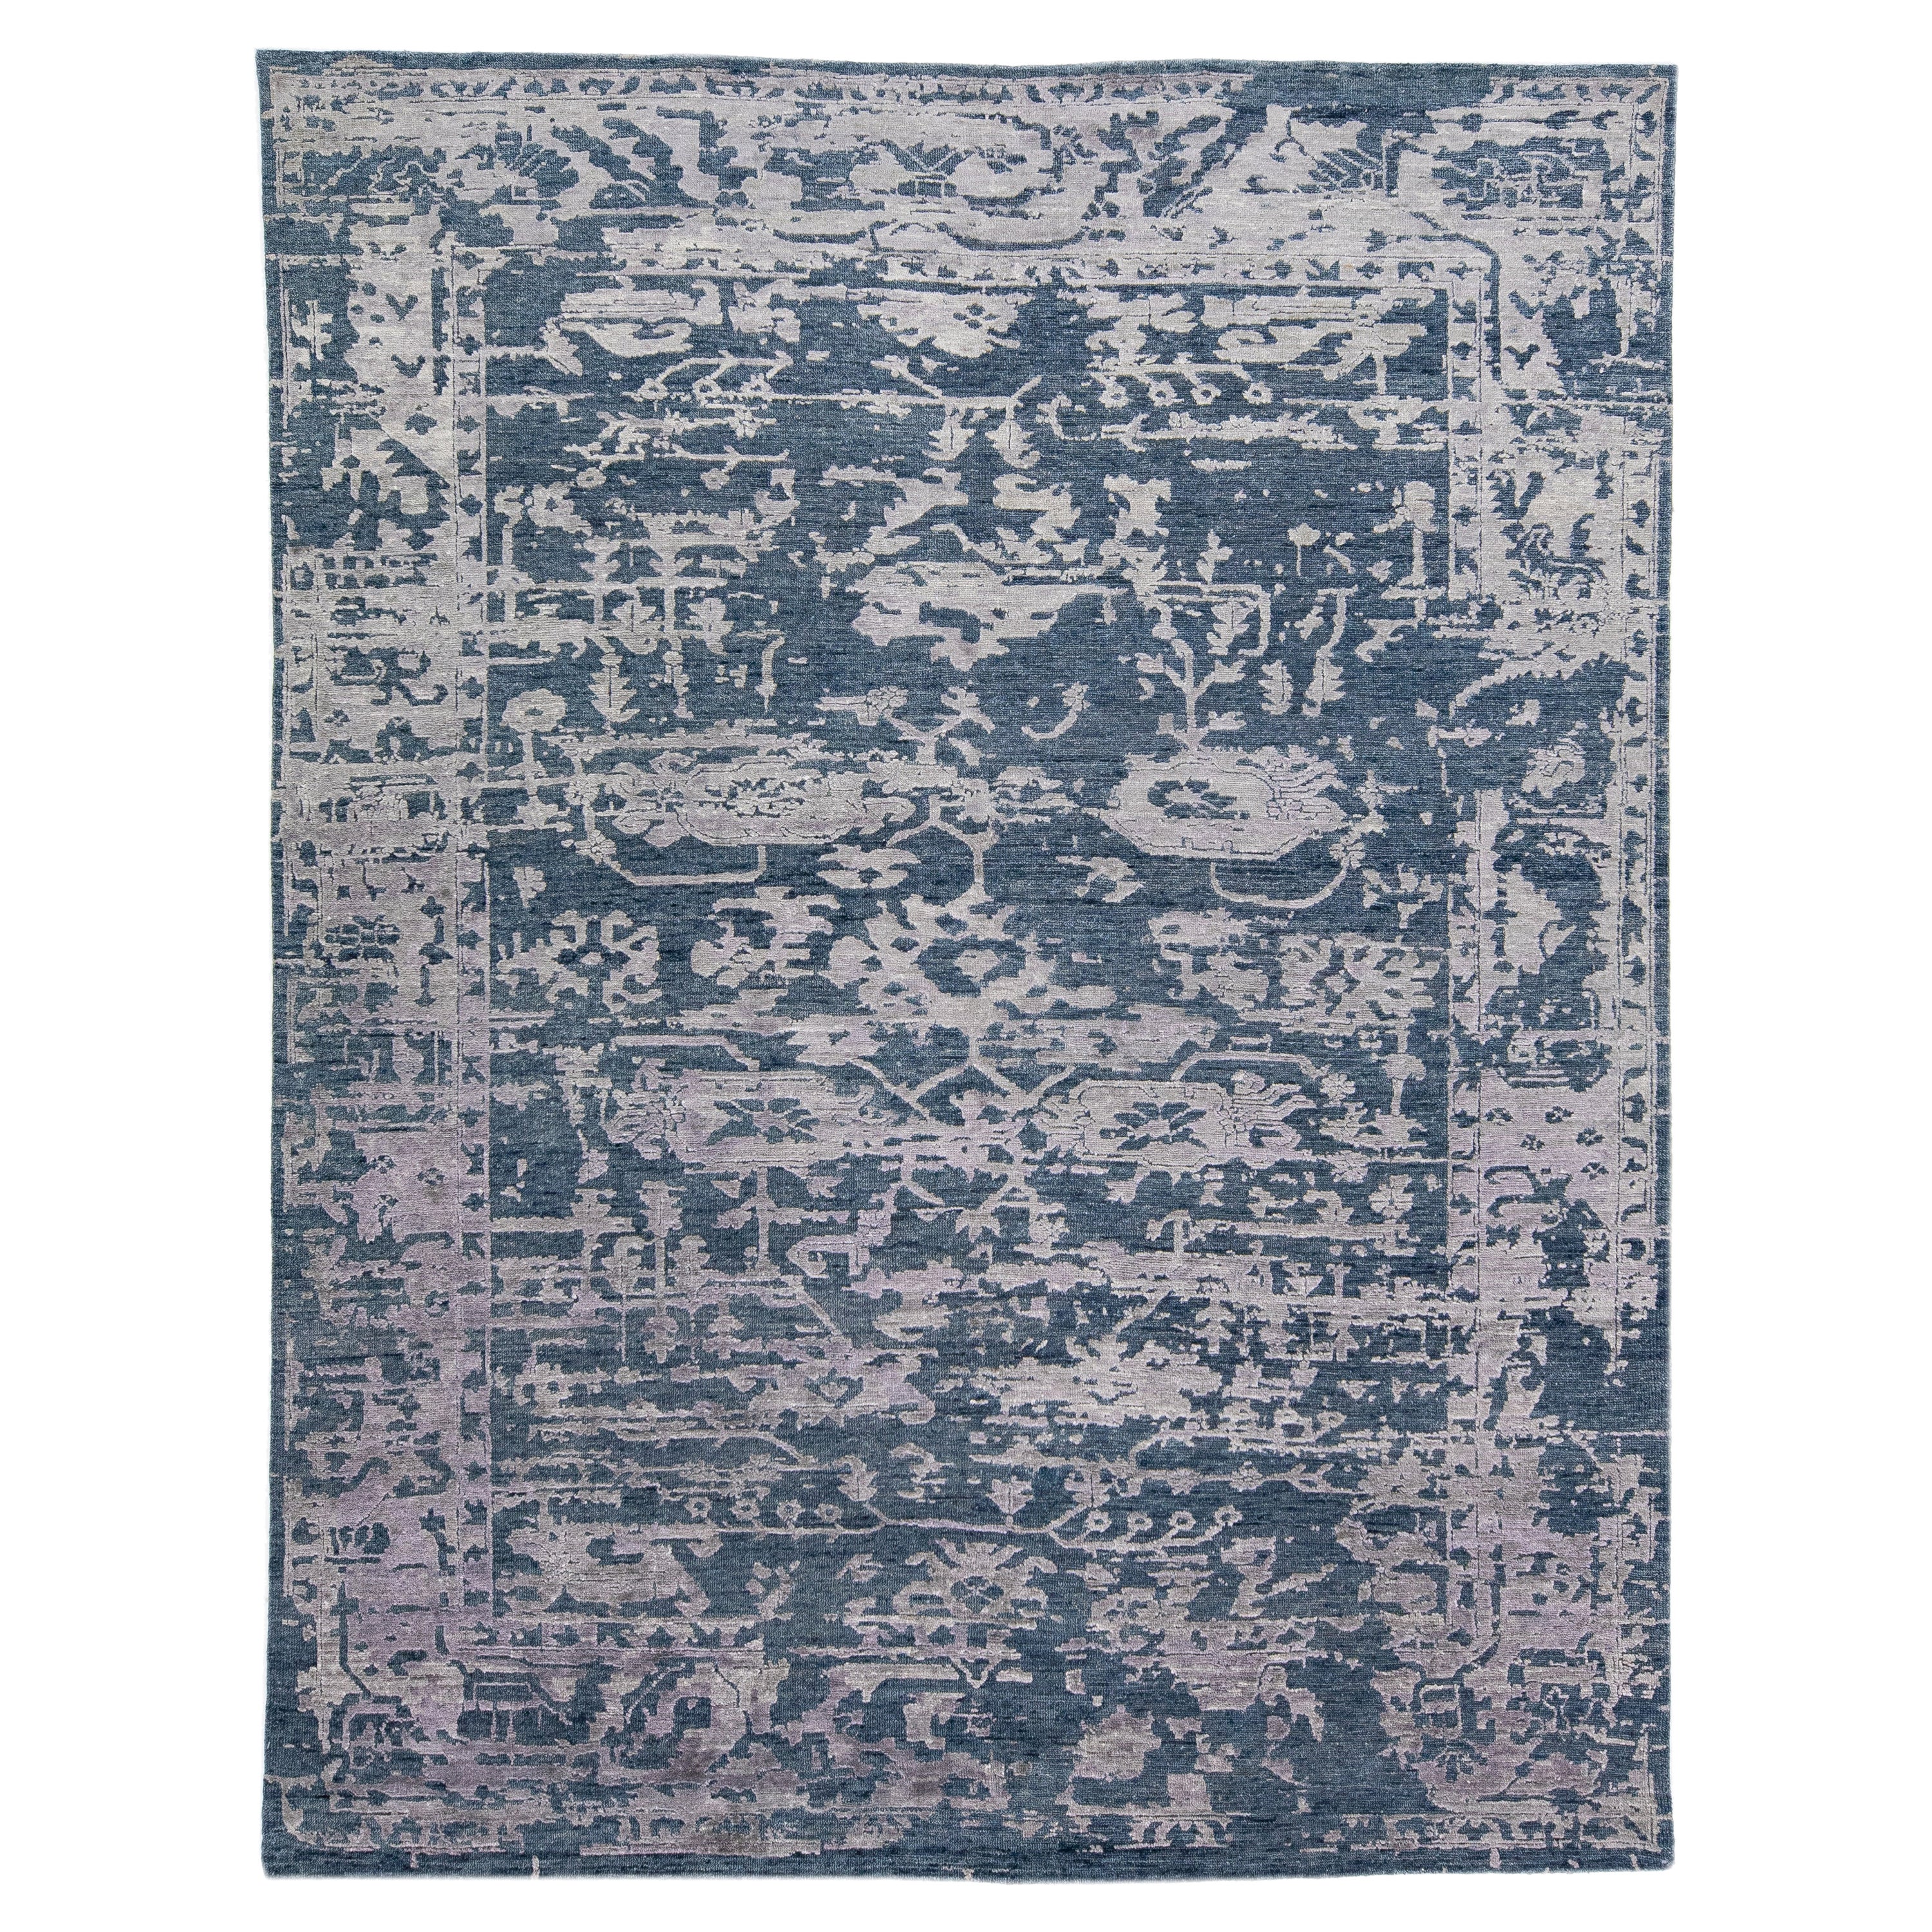 Handmade Contemporary Wool & Silk Abstract Rug with Blue & Gray Field